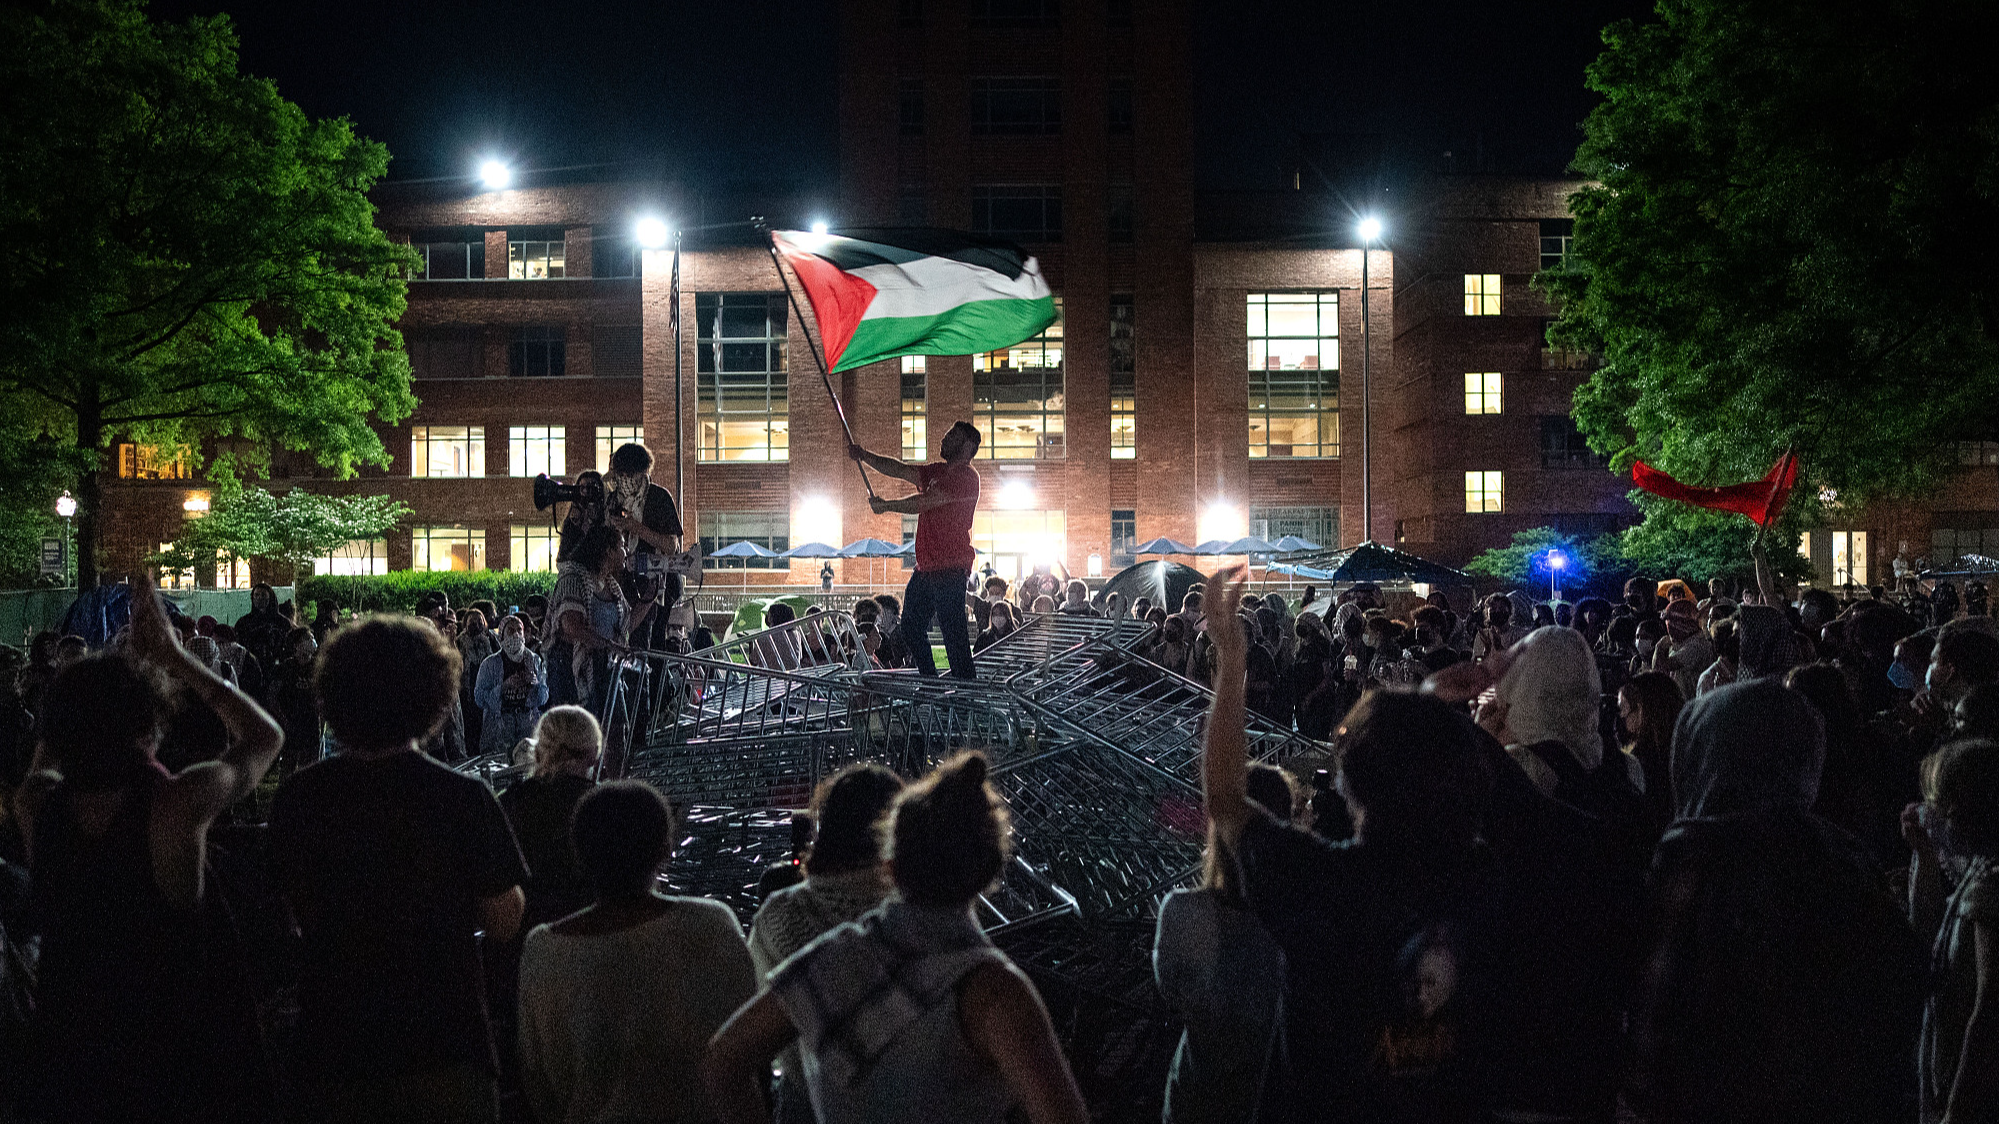 A man holds up a Palestinian flag as activists and students chant, surrounding piled barricades at an encampment at George Washington University in Washington, D.C., U.S., April 29, 2024. /CFP